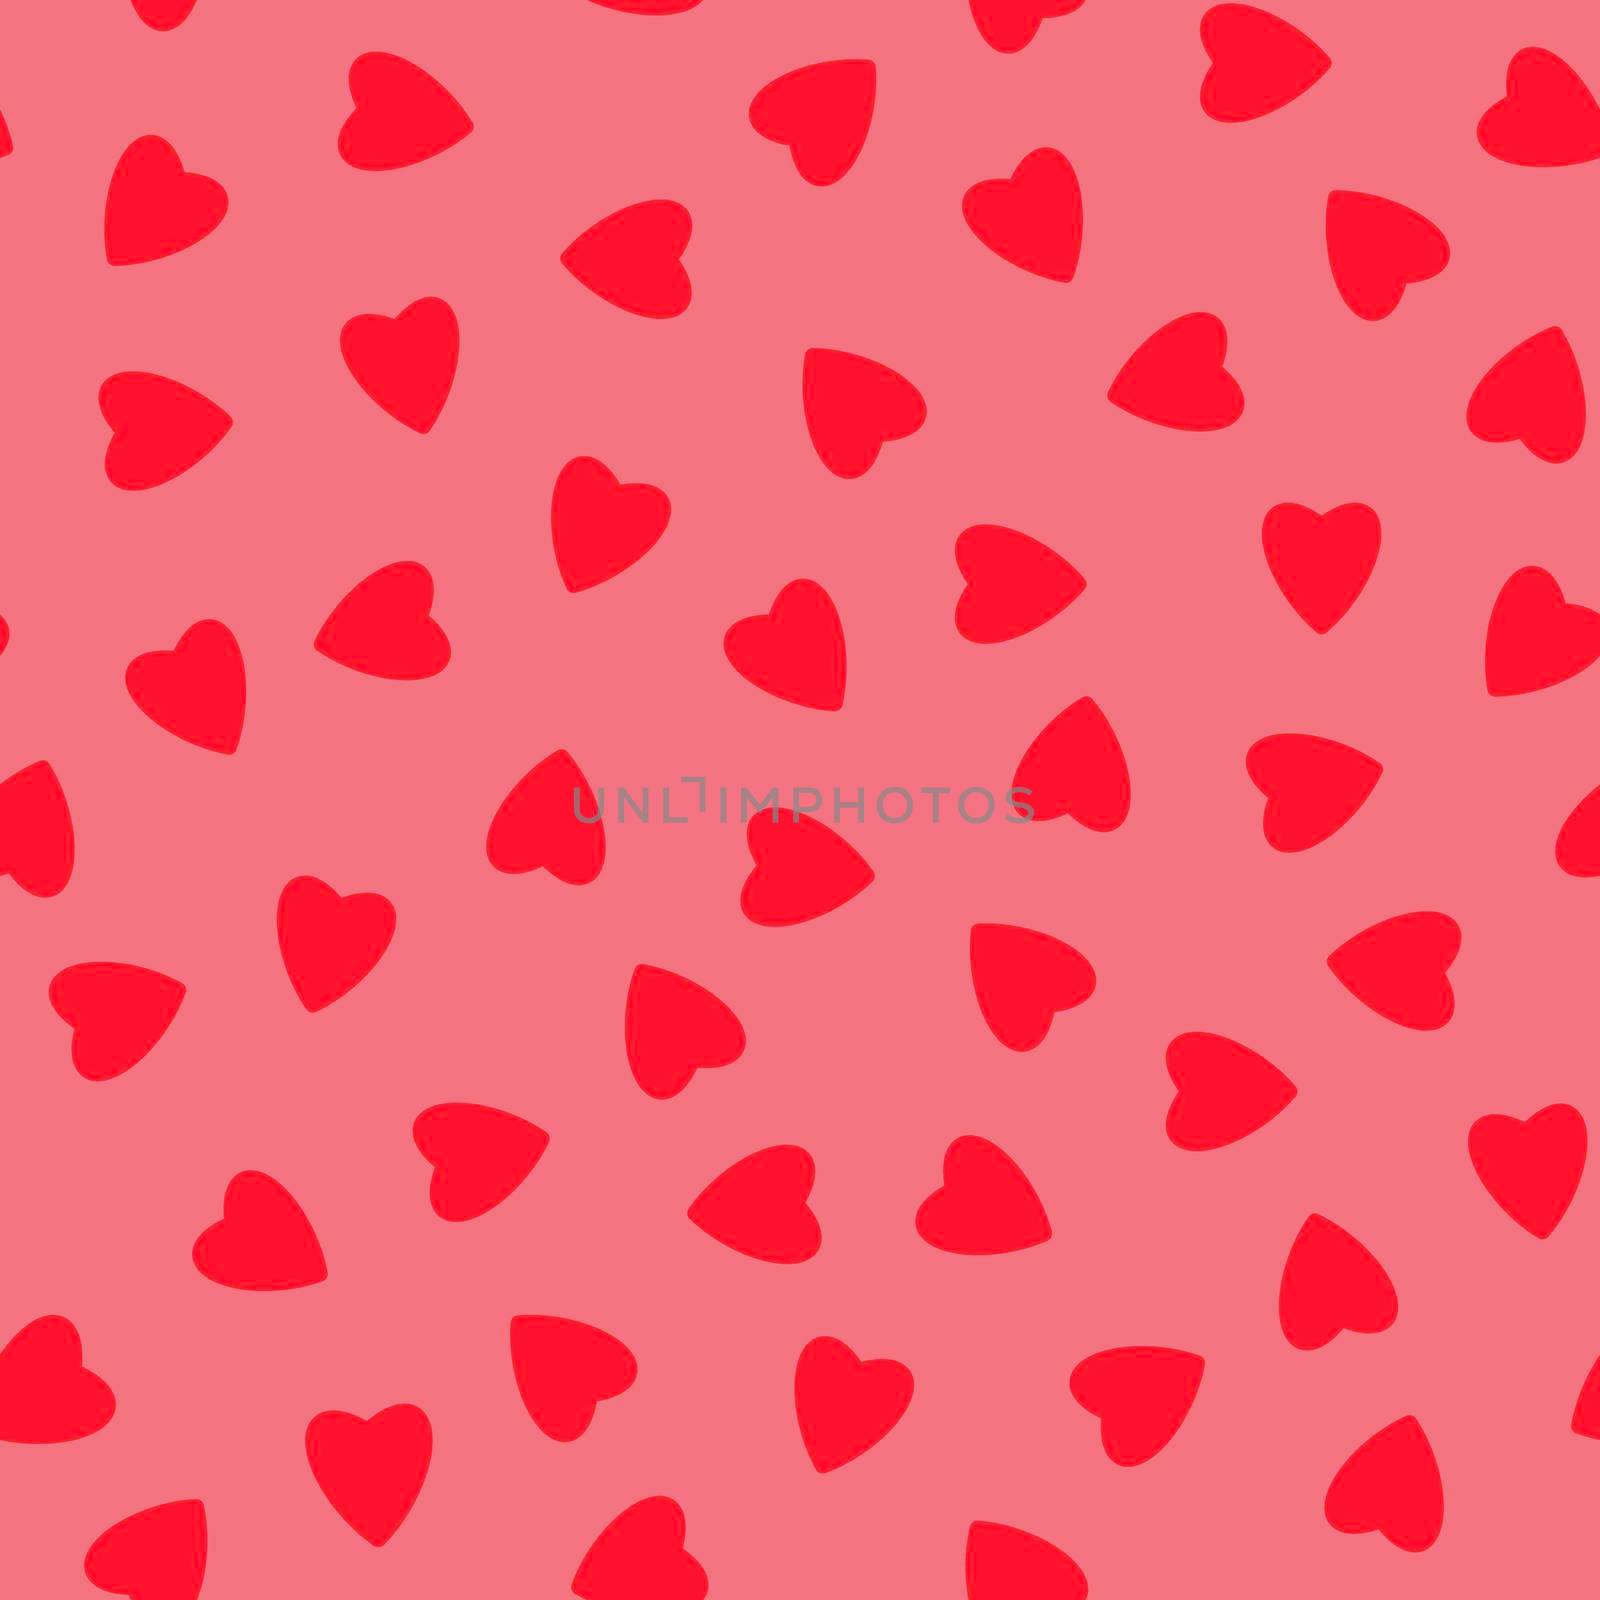 Simple hearts seamless pattern,endless chaotic texture made of tiny heart silhouettes.Valentines,mothers day background.Great for Easter,wedding,scrapbook,gift wrapping paper,textiles.Red on pink.